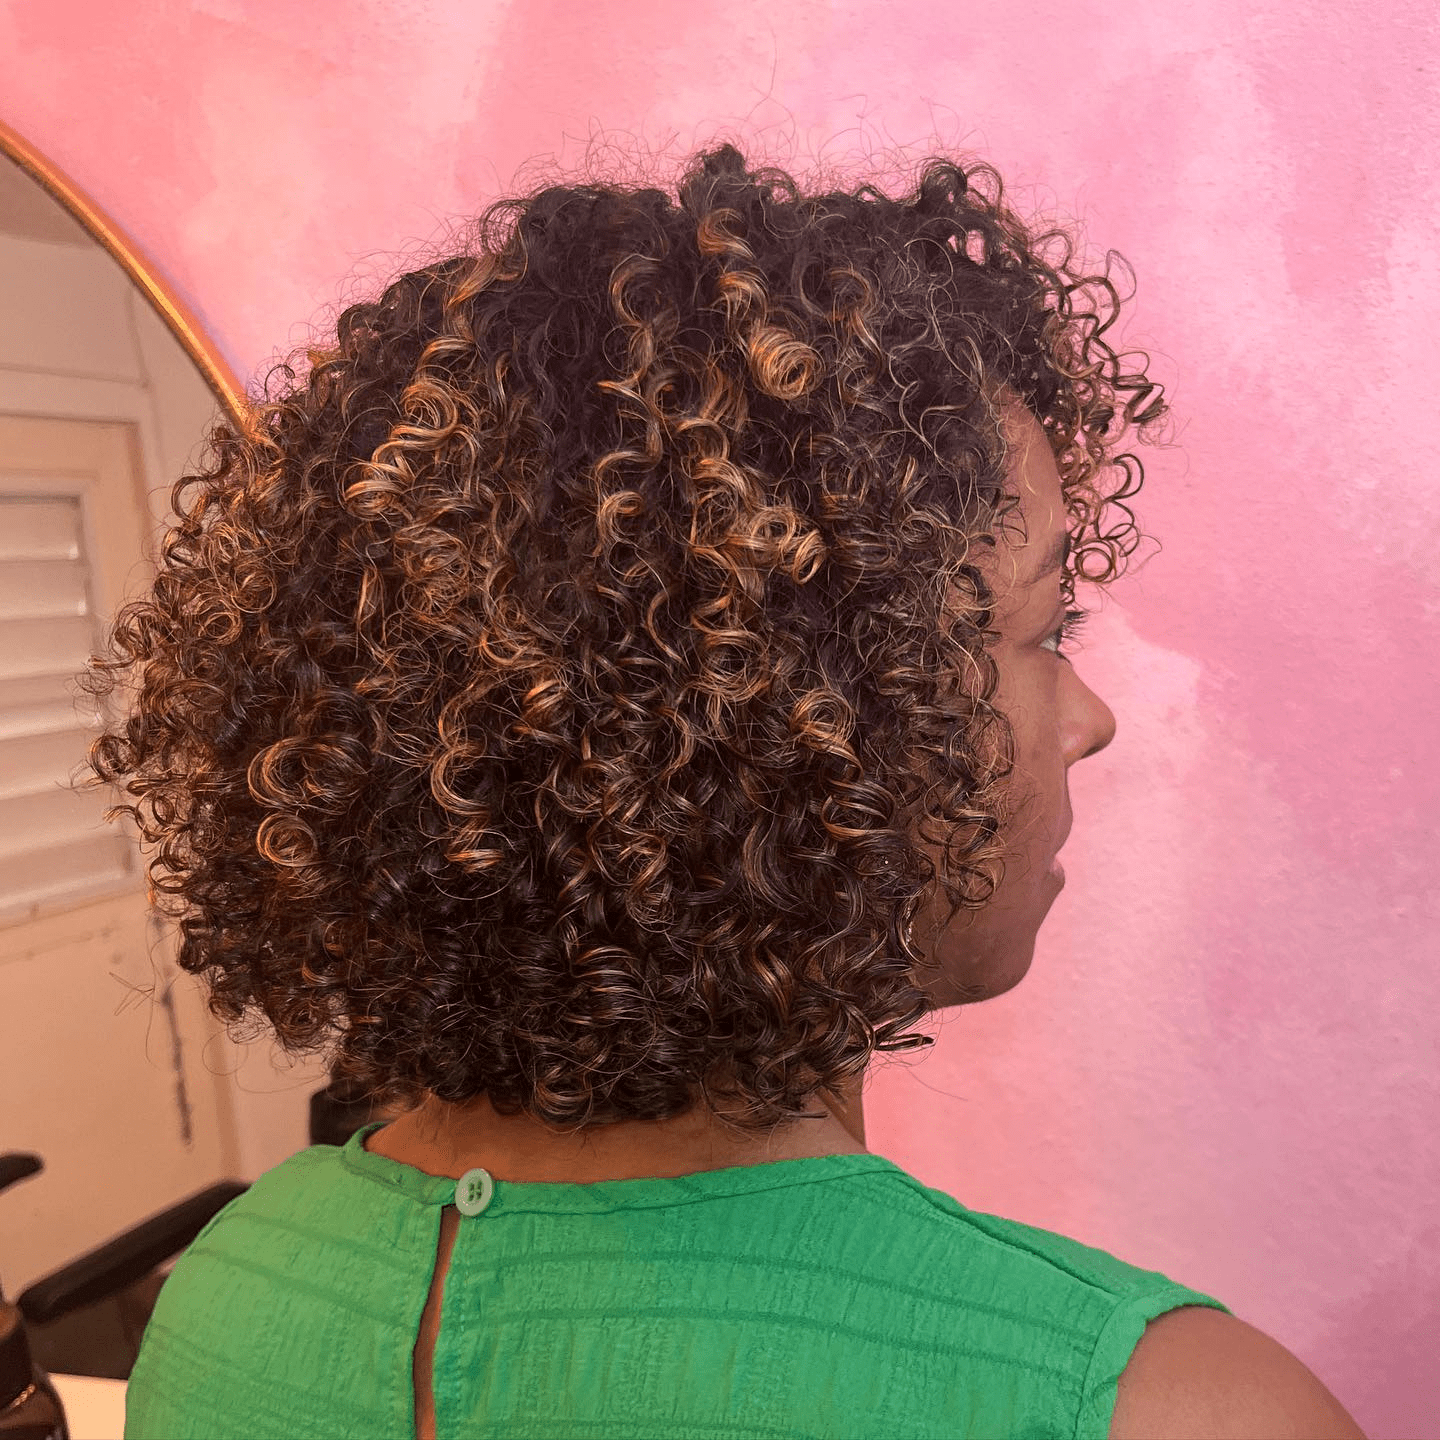 Lively Curls and Shades